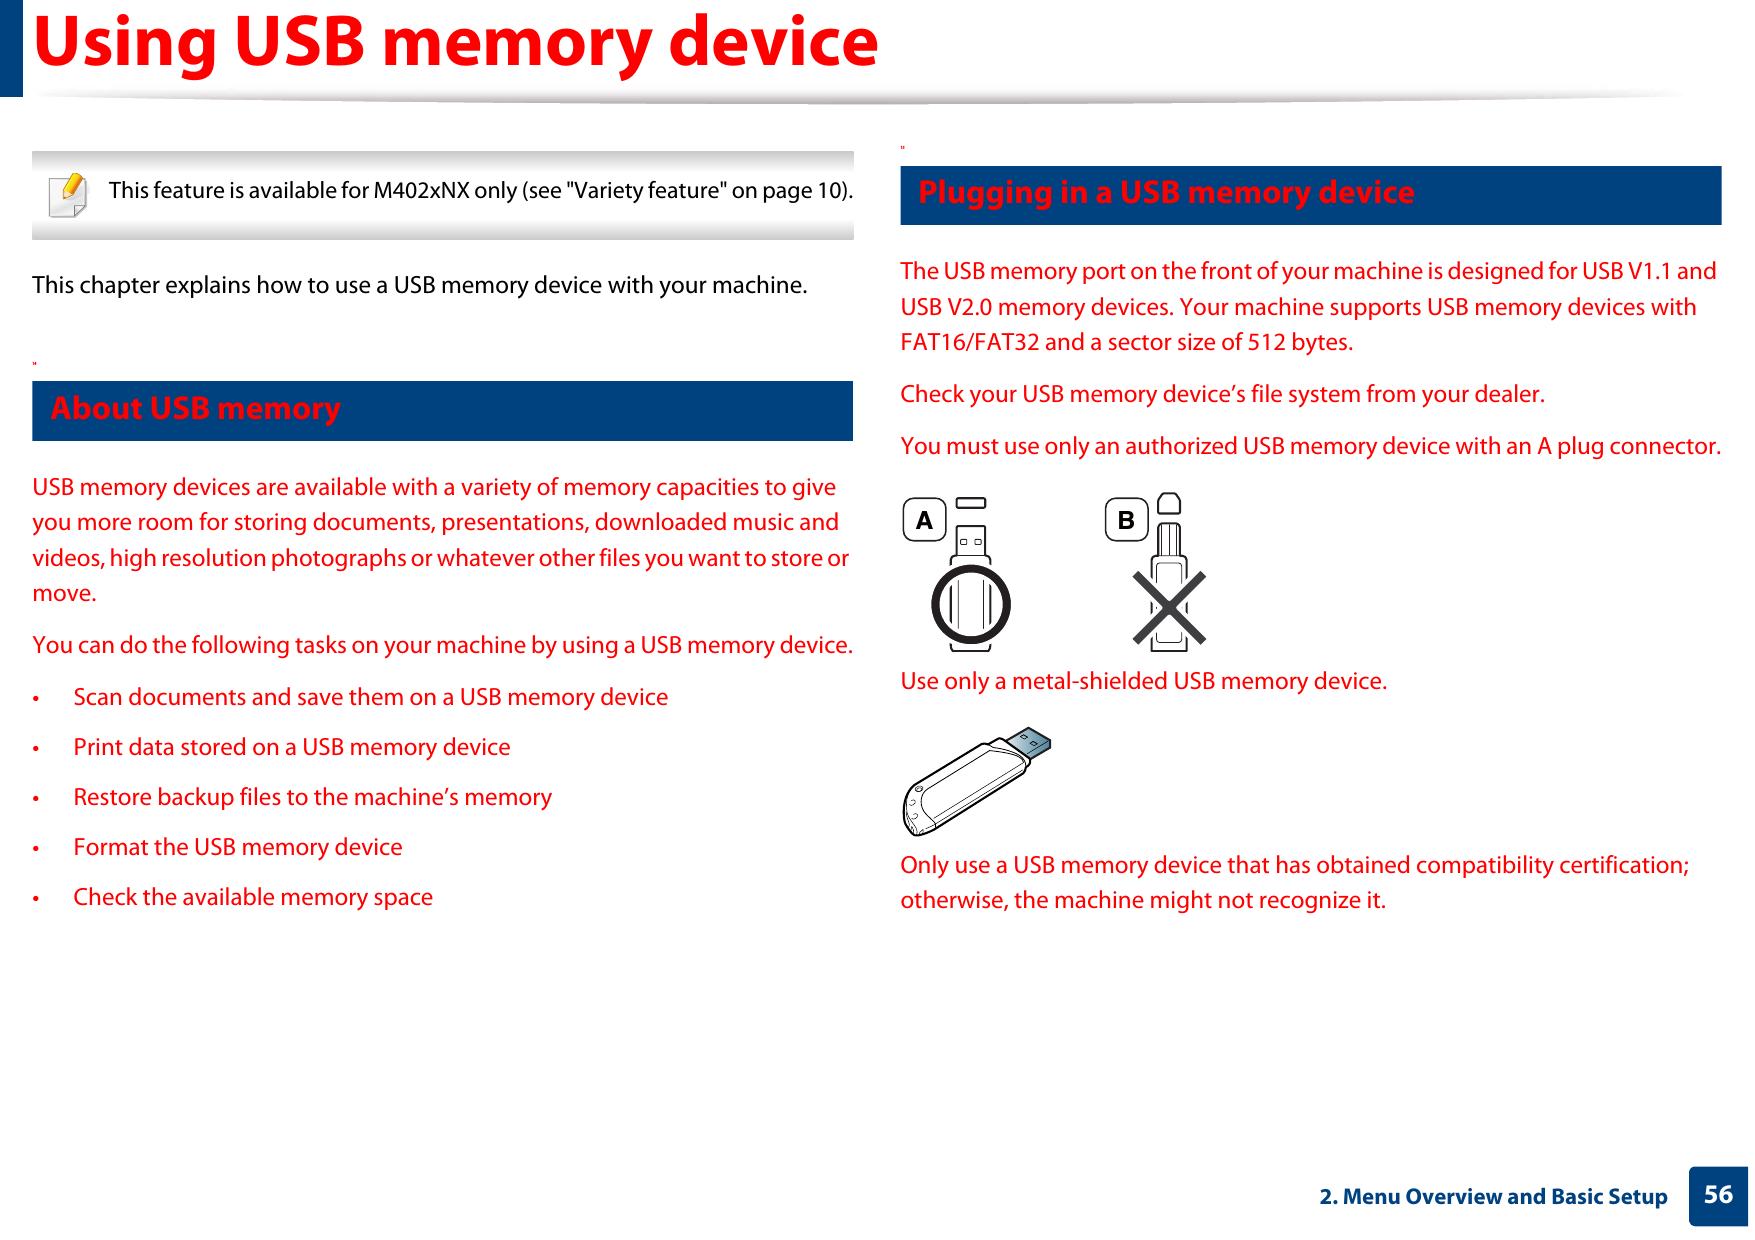 562. Menu Overview and Basic SetupUsing USB memory device This feature is available for M402xNX only (see &quot;Variety feature&quot; on page 10). This chapter explains how to use a USB memory device with your machine.14 About USB memoryUSB memory devices are available with a variety of memory capacities to give you more room for storing documents, presentations, downloaded music and videos, high resolution photographs or whatever other files you want to store or move.You can do the following tasks on your machine by using a USB memory device.• Scan documents and save them on a USB memory device• Print data stored on a USB memory device• Restore backup files to the machine’s memory• Format the USB memory device• Check the available memory space15 Plugging in a USB memory deviceThe USB memory port on the front of your machine is designed for USB V1.1 and USB V2.0 memory devices. Your machine supports USB memory devices with FAT16/FAT32 and a sector size of 512 bytes.Check your USB memory device’s file system from your dealer.You must use only an authorized USB memory device with an A plug connector.Use only a metal-shielded USB memory device.Only use a USB memory device that has obtained compatibility certification; otherwise, the machine might not recognize it.A B